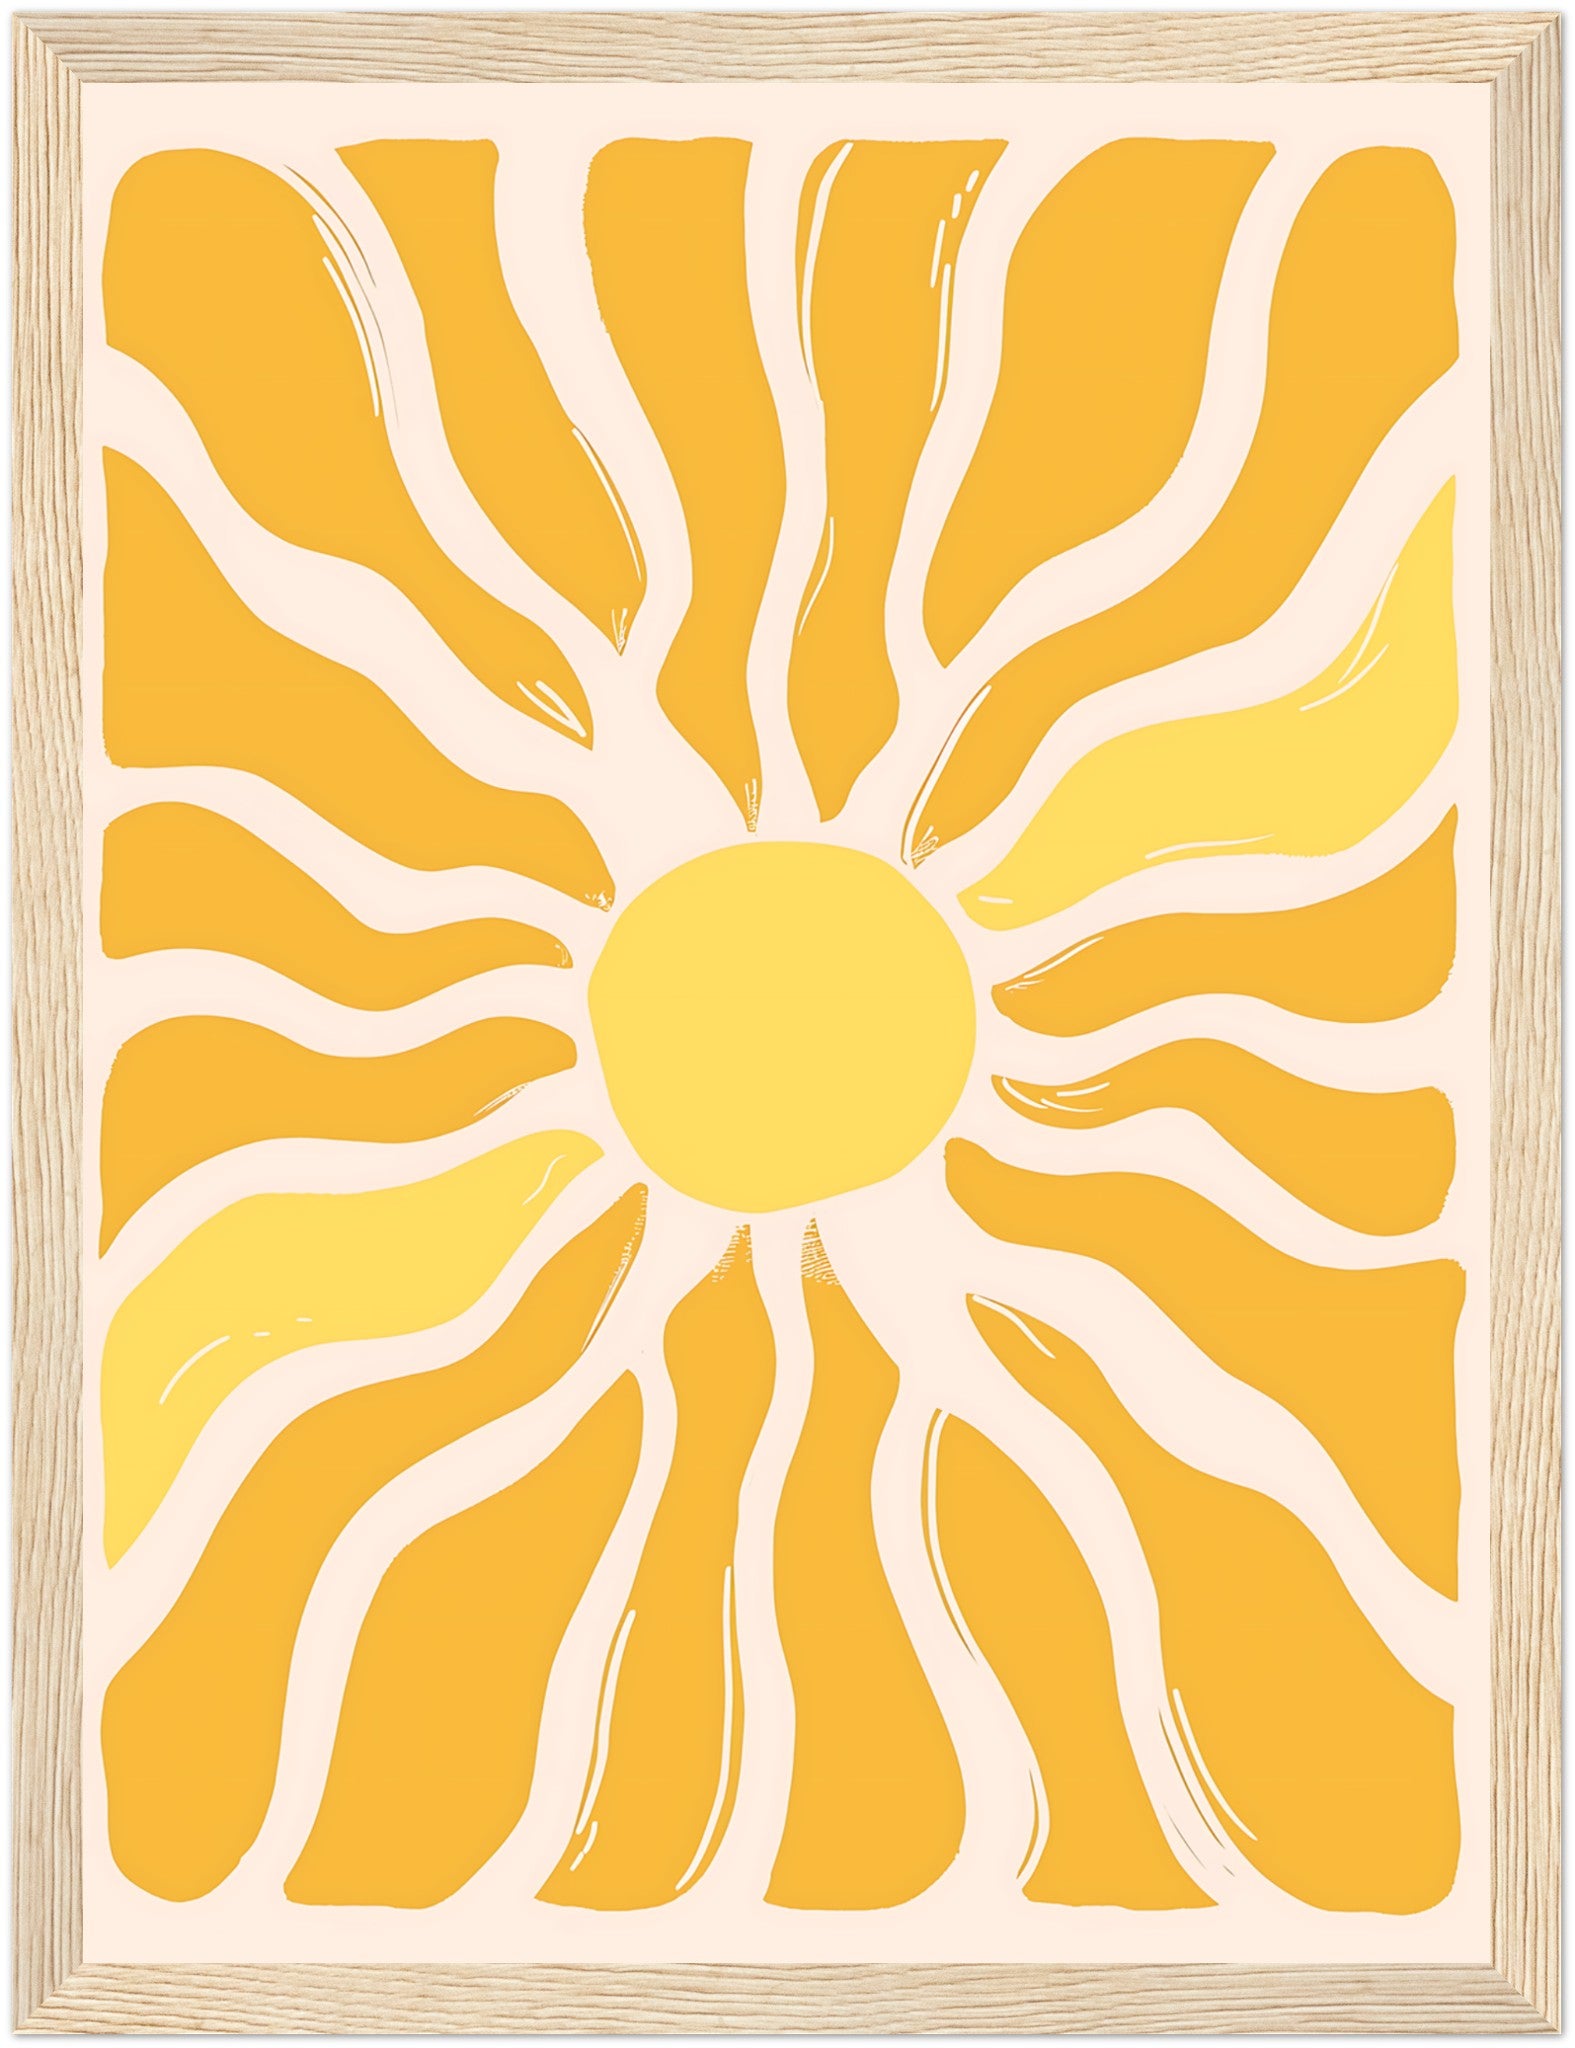 Abstract sunburst pattern with yellow and white rays on a framed canvas.